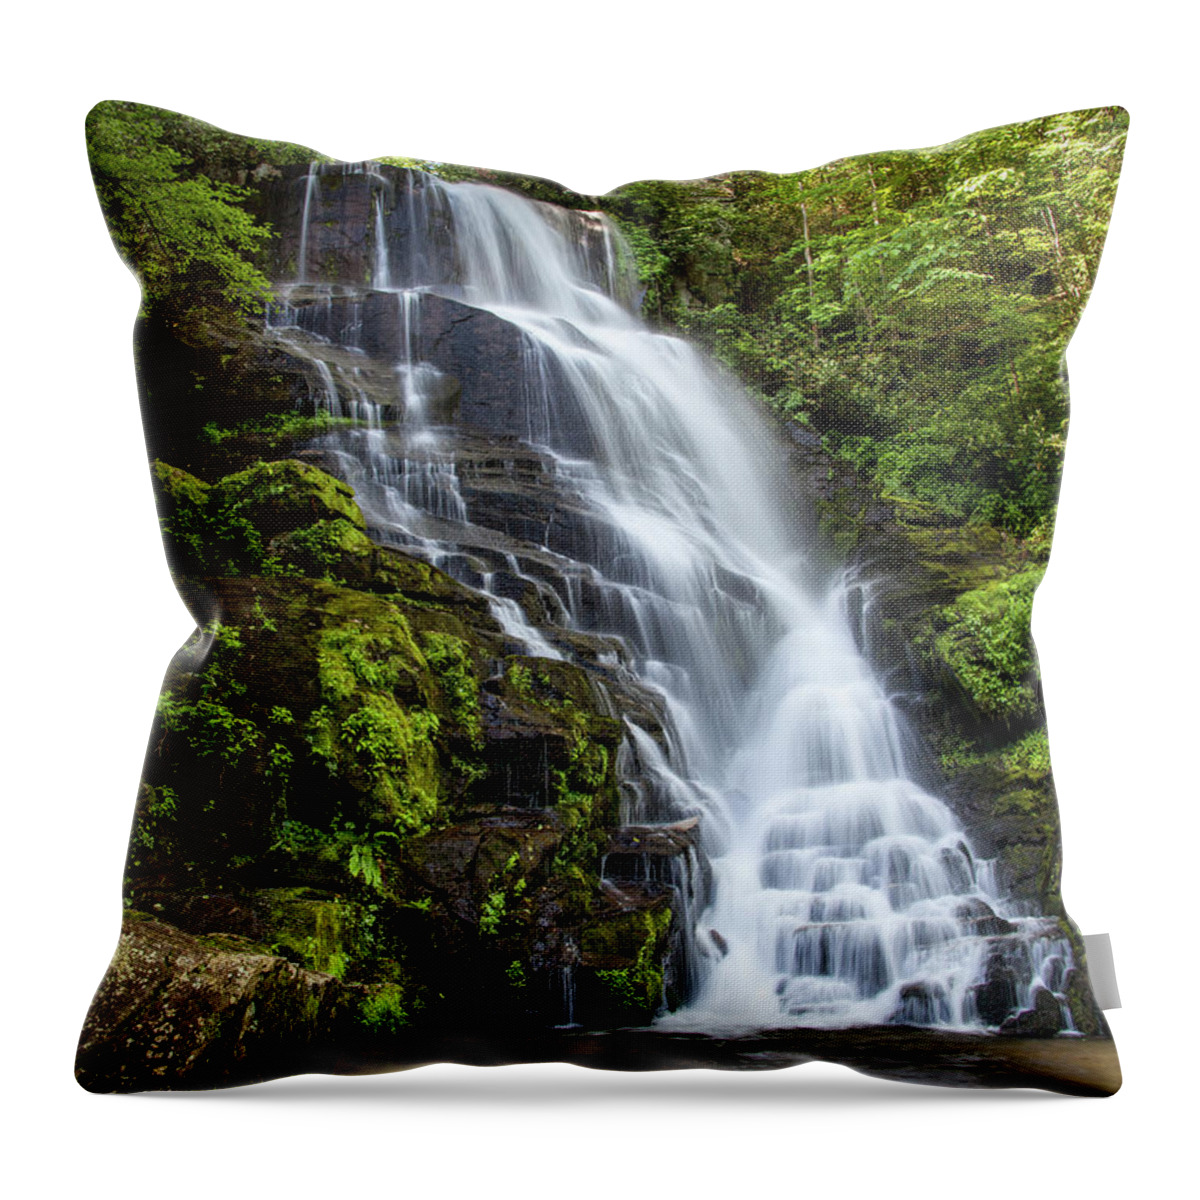 Eastatoe Falls Throw Pillow featuring the photograph Morning at Eastatoe Falls by Rob Travis